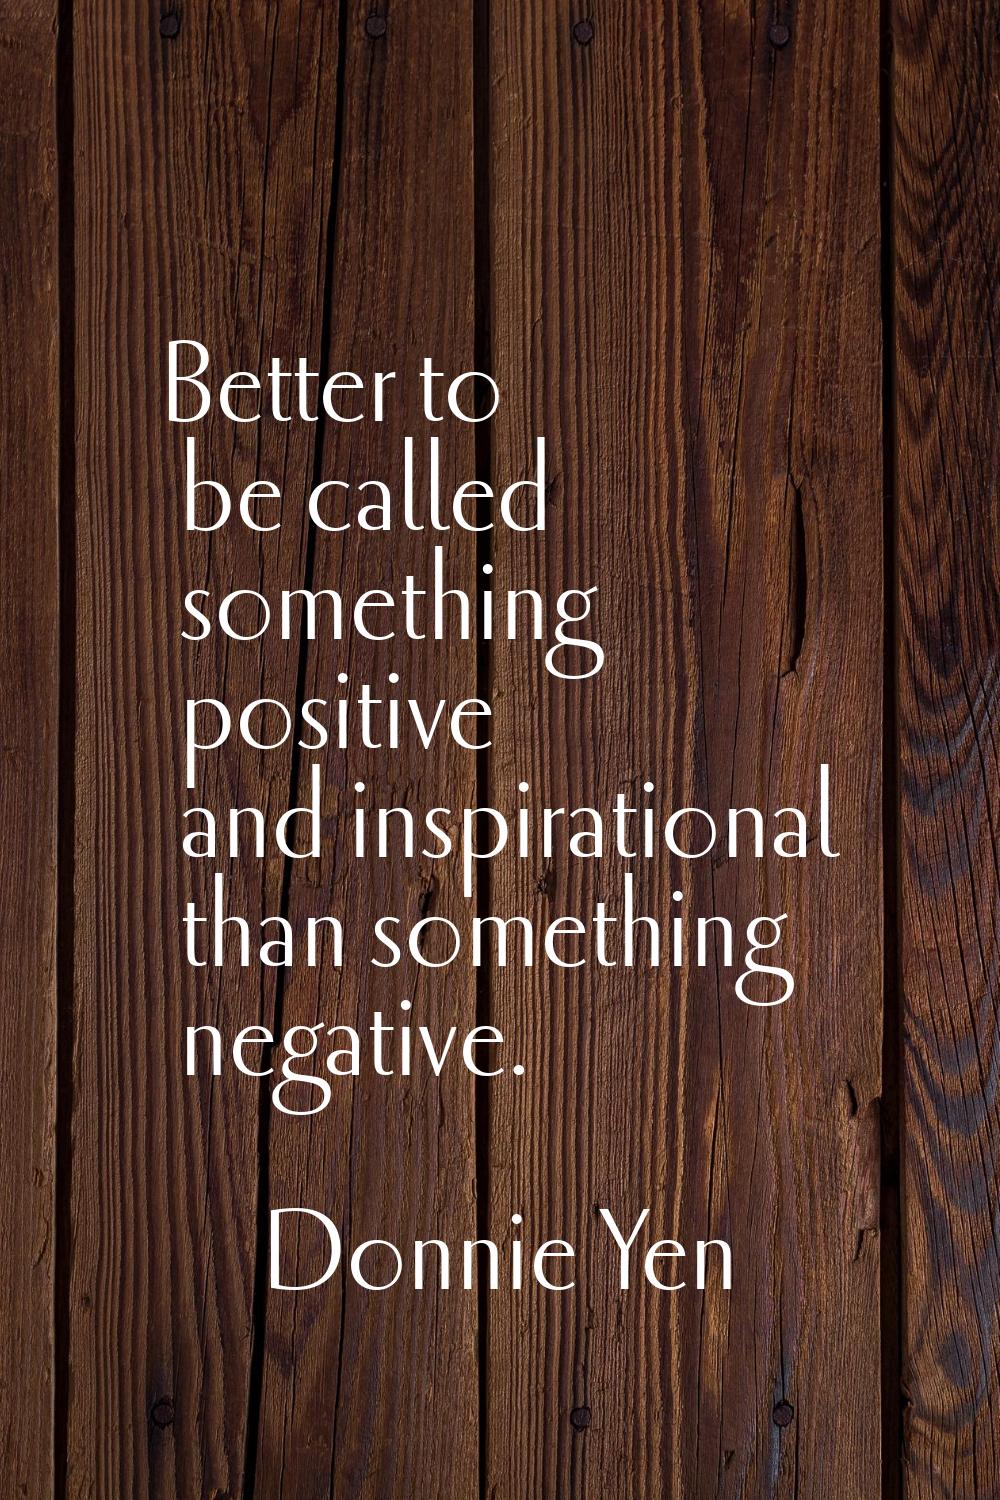 Better to be called something positive and inspirational than something negative.